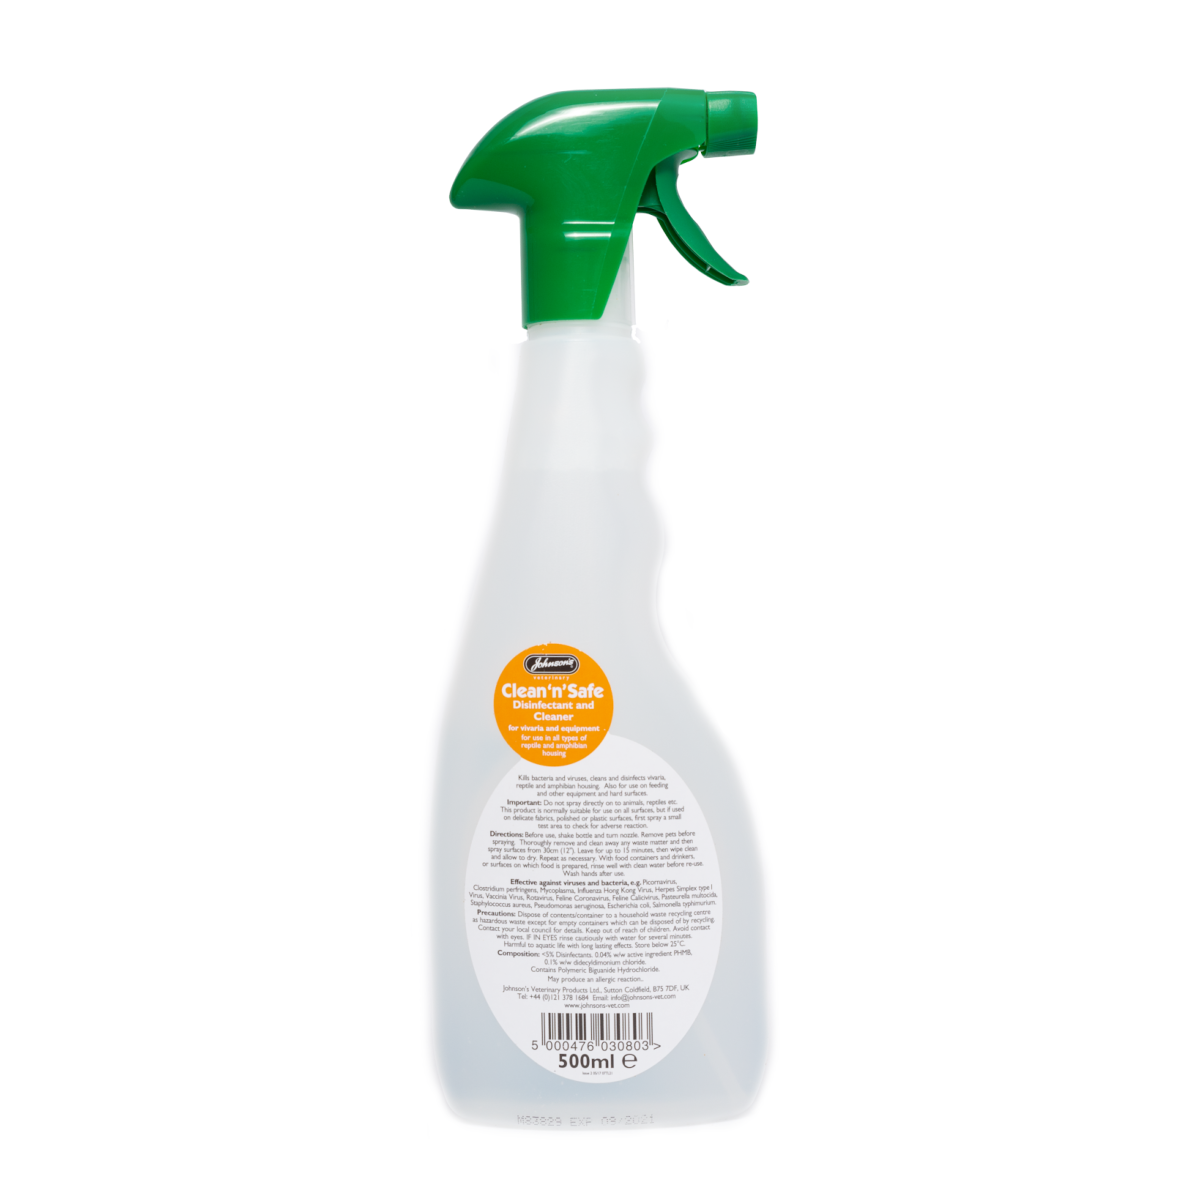 Johnson's Veterinary | Reptile Disinfectant | Clean 'N' Safe - 500ml